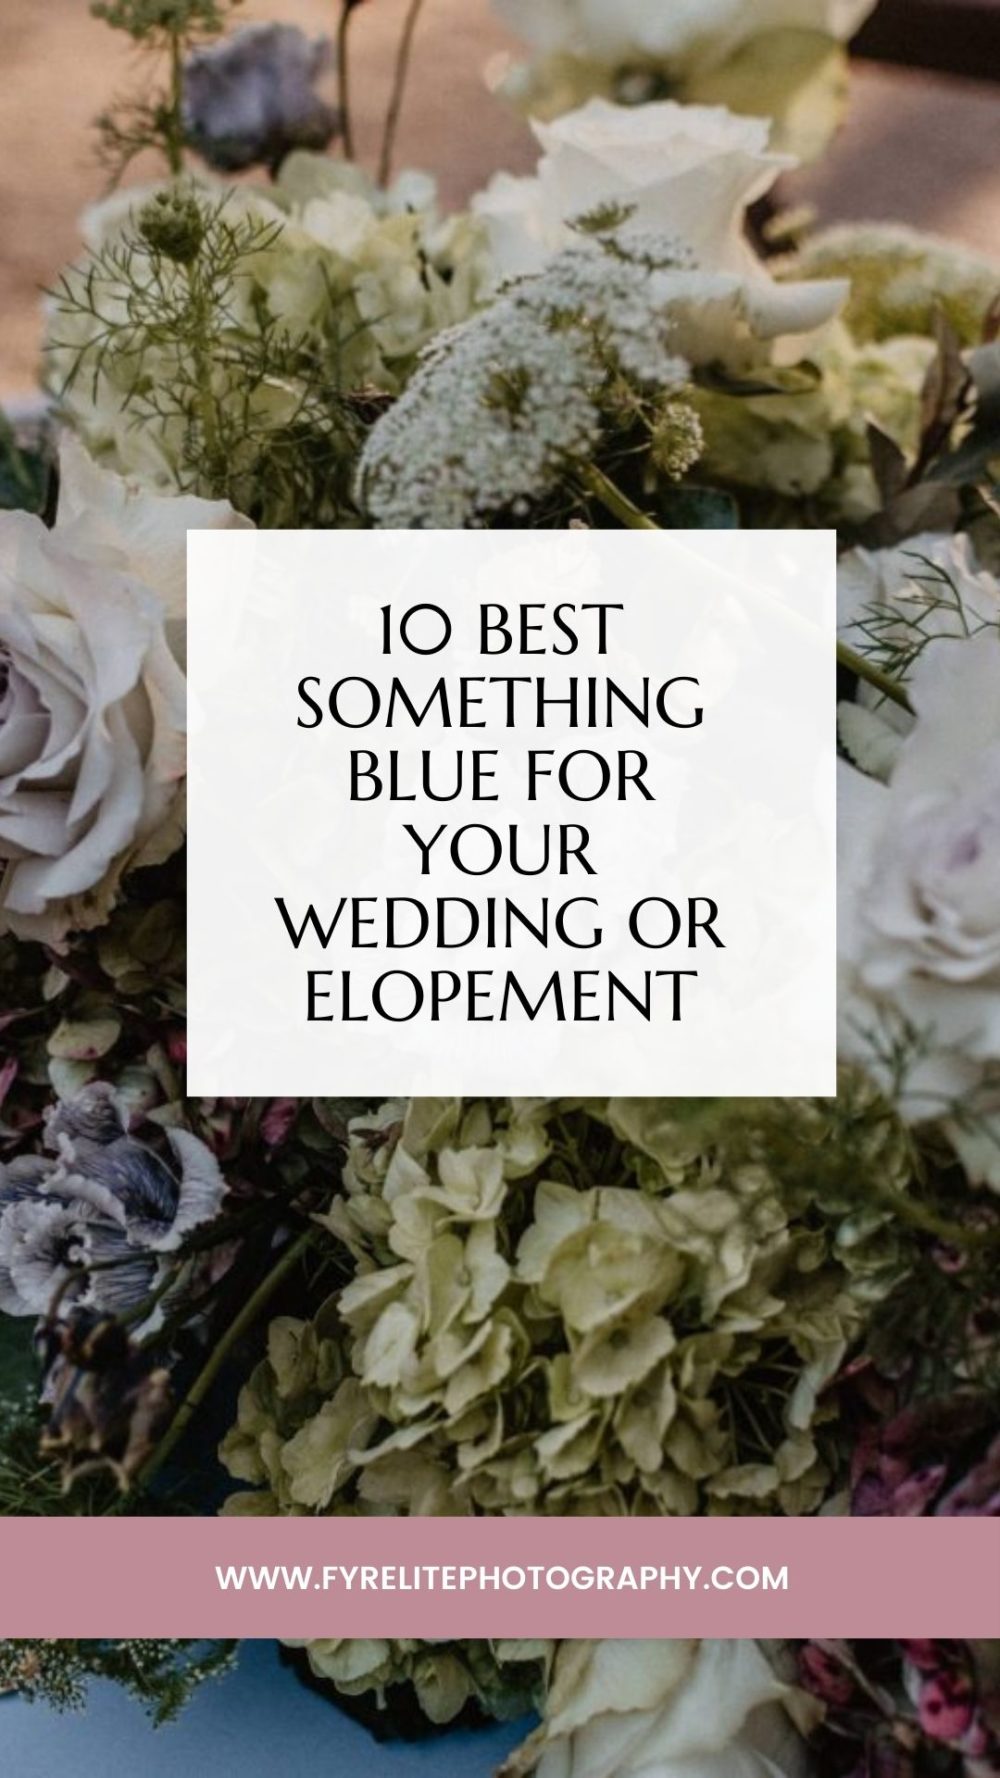 10 Best Something Blue For Your Wedding Or Elopement​